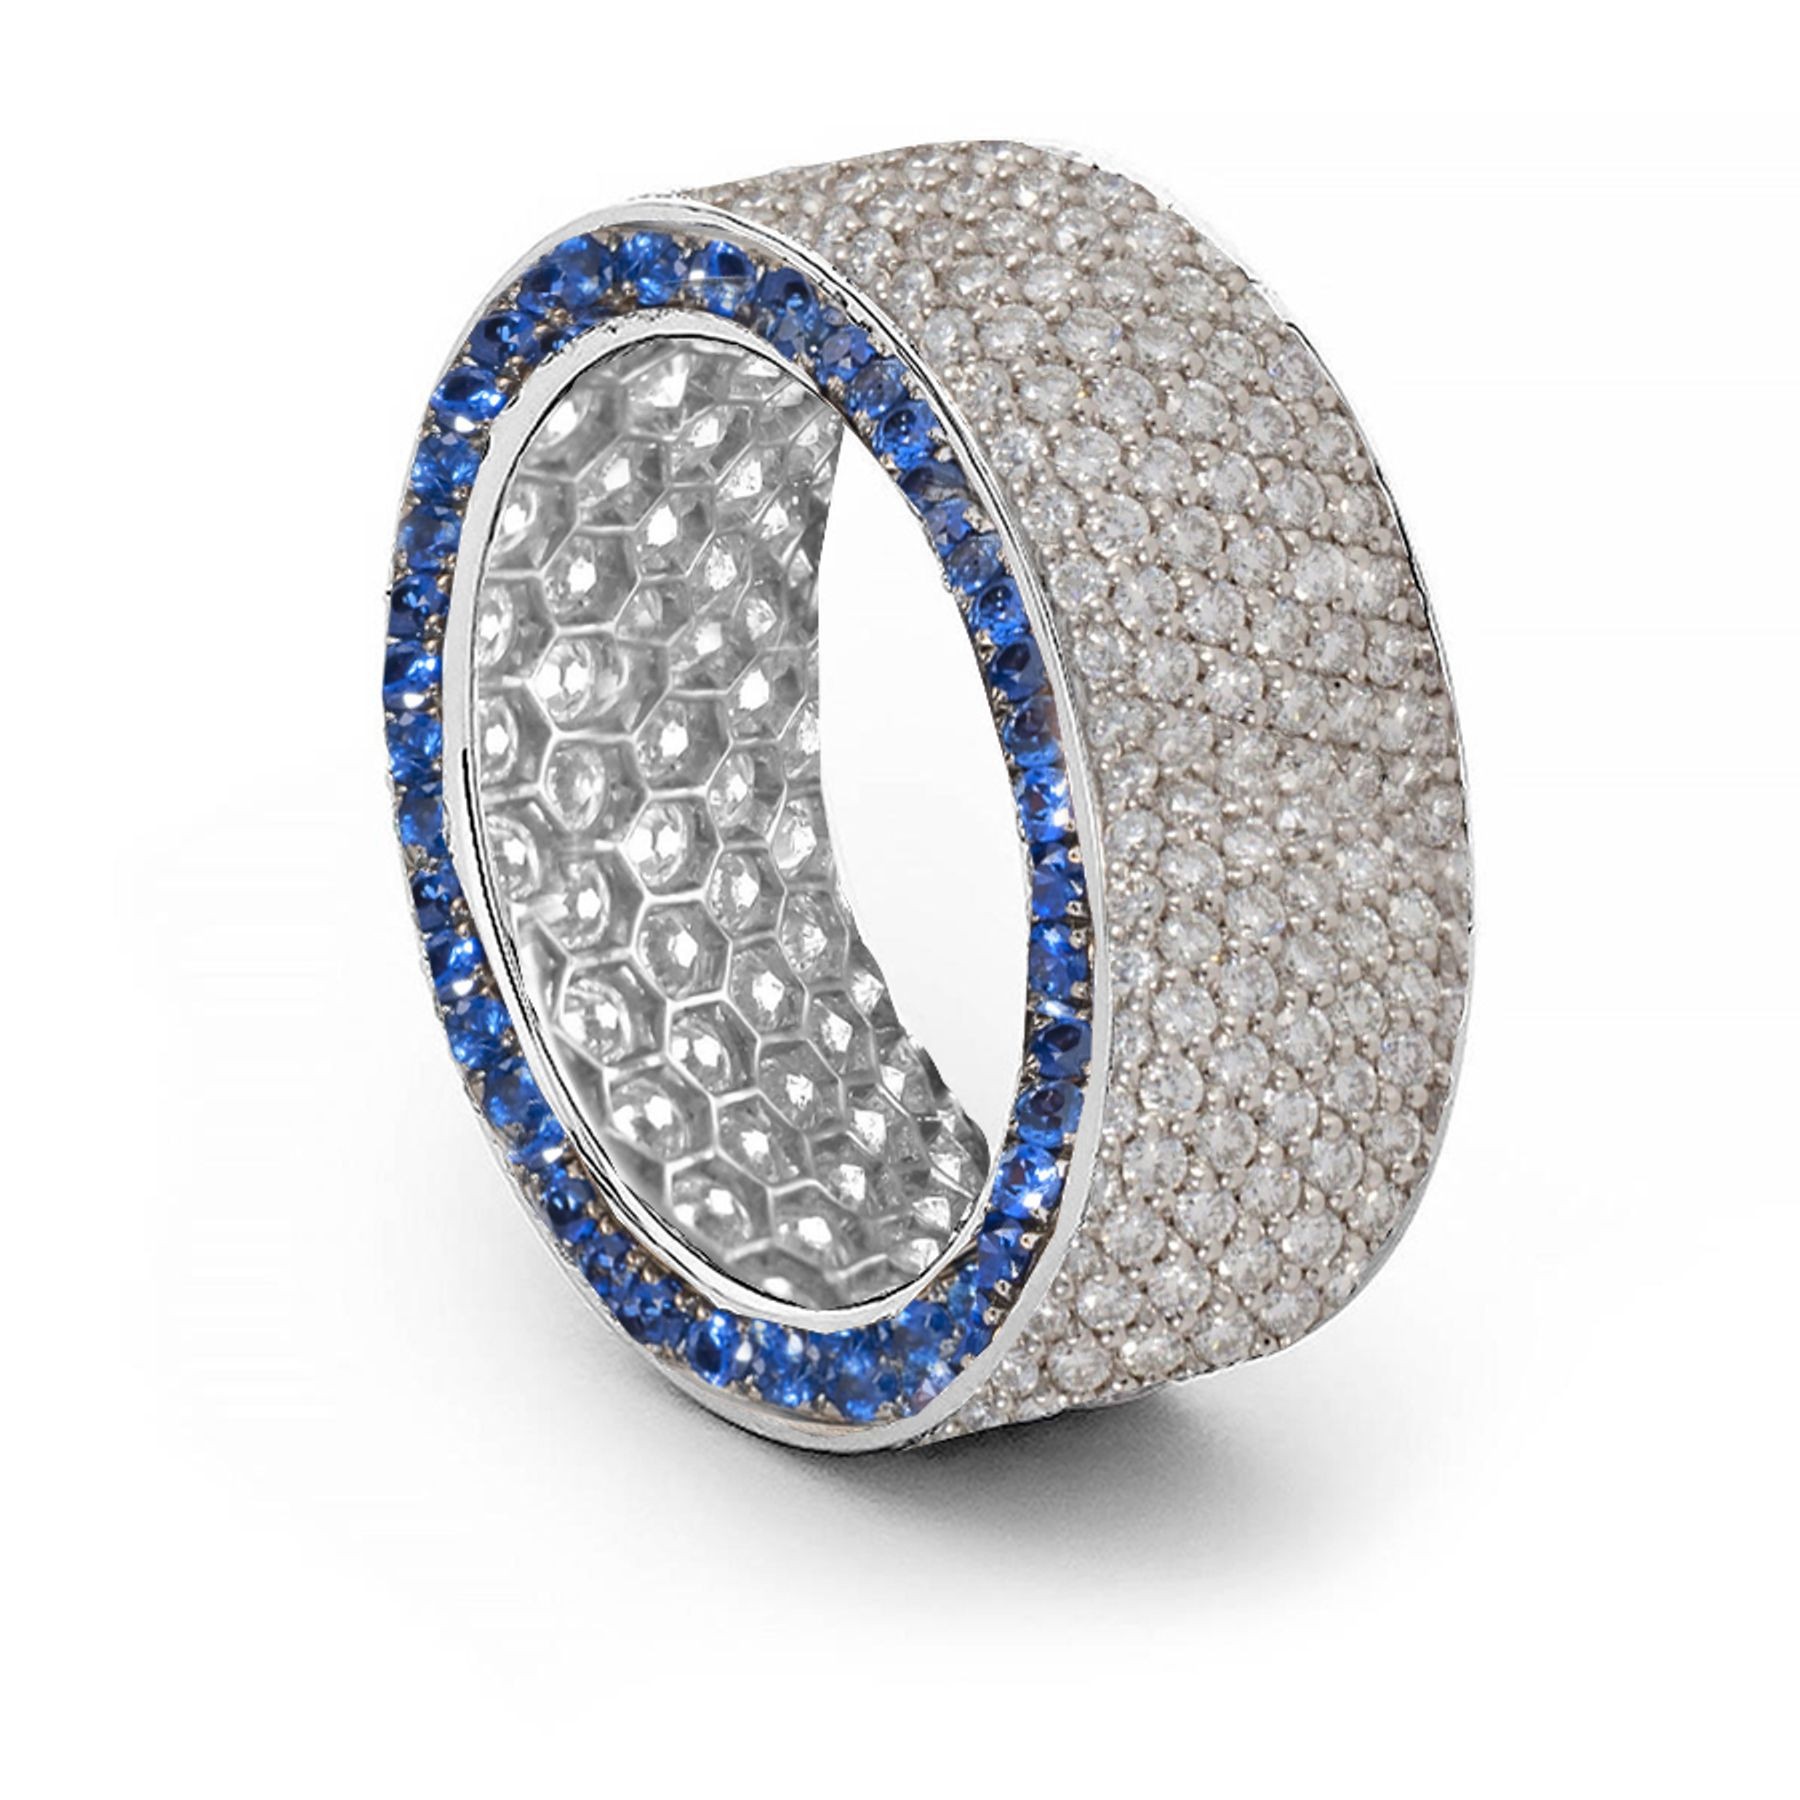 Shop Fine Quality Made To Order Round pave Set Diamond & Blue Sapphire Eternity Style Wedding & Anniversary Rings